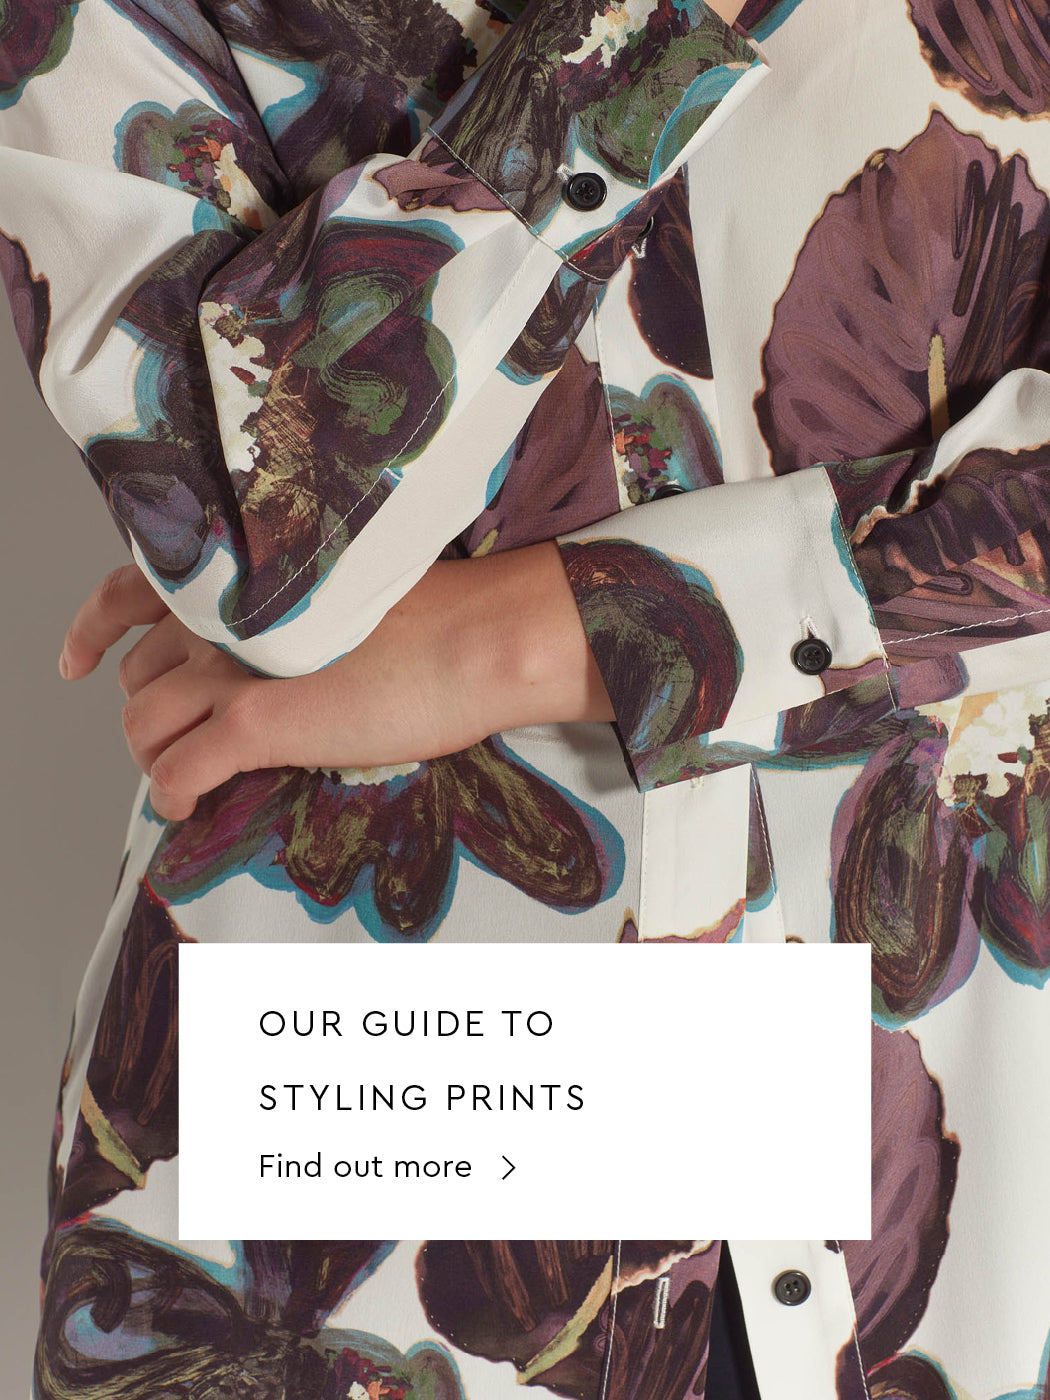 Our guide to styling prints